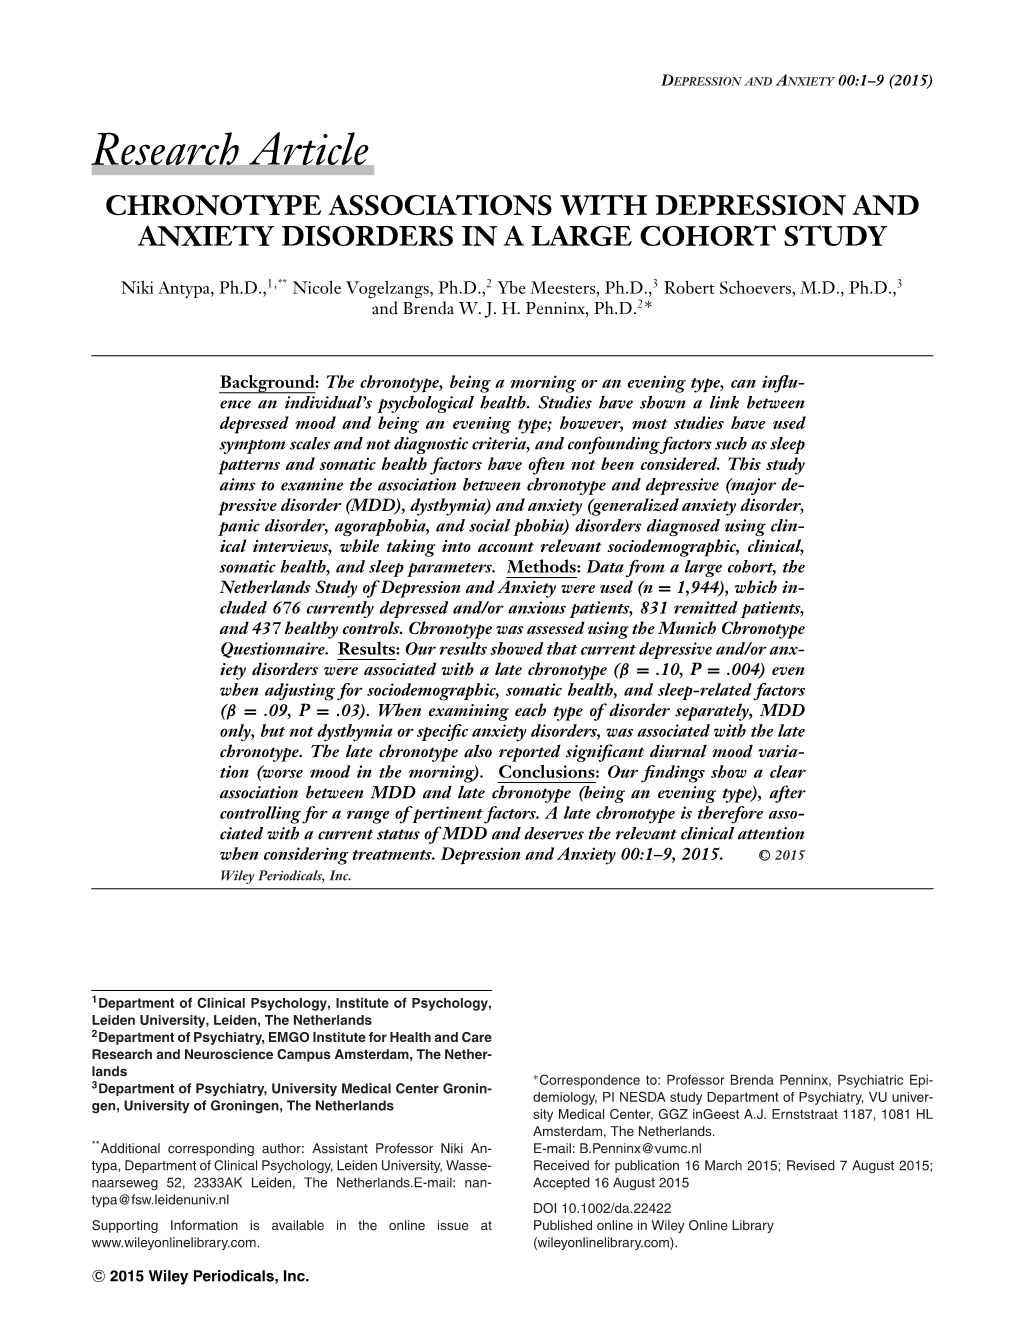 Chronotype Associations with Depression and Anxiety Disorders in a Large Cohort Study